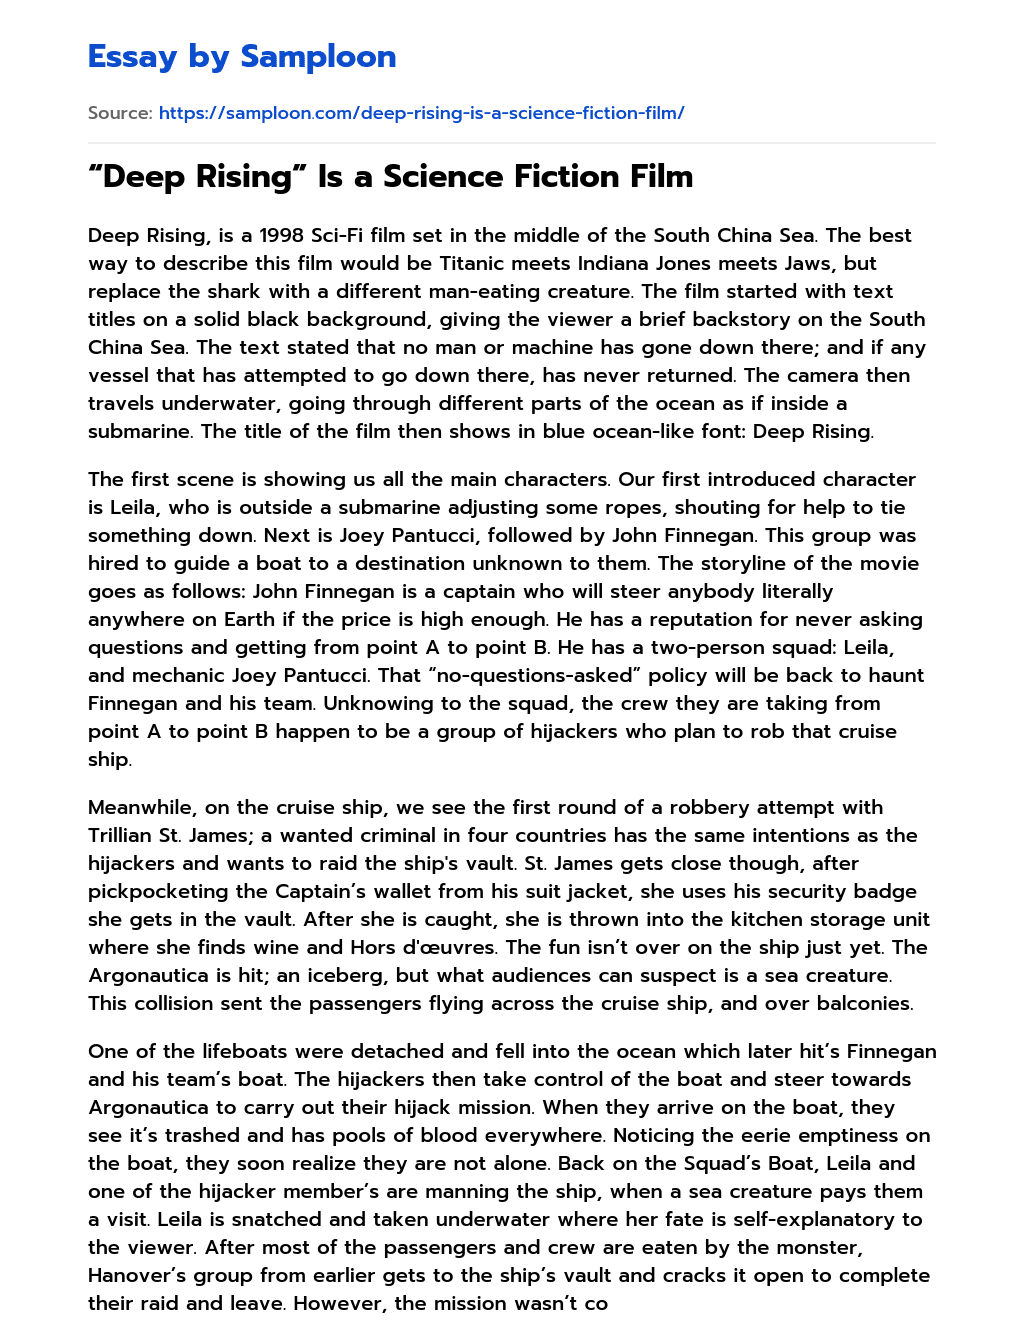 “Deep Rising” Is a Science Fiction Film essay